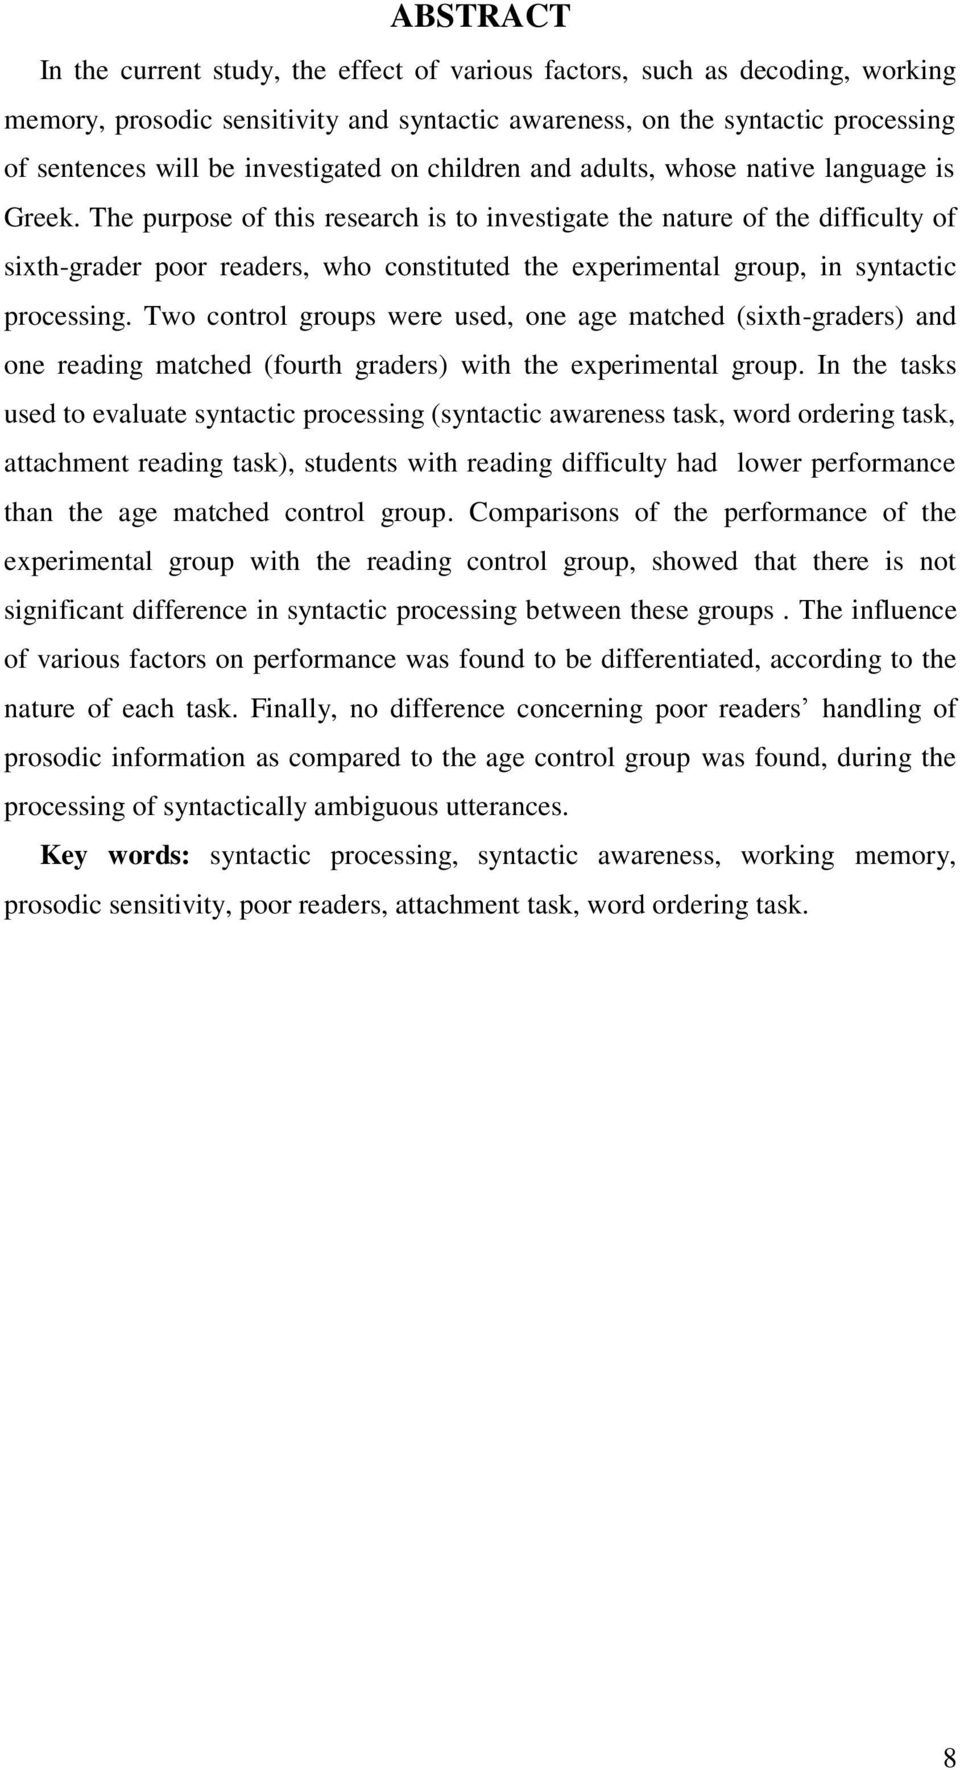 The purpose of this research is to investigate the nature of the difficulty of sixth-grader poor readers, who constituted the experimental group, in syntactic processing.